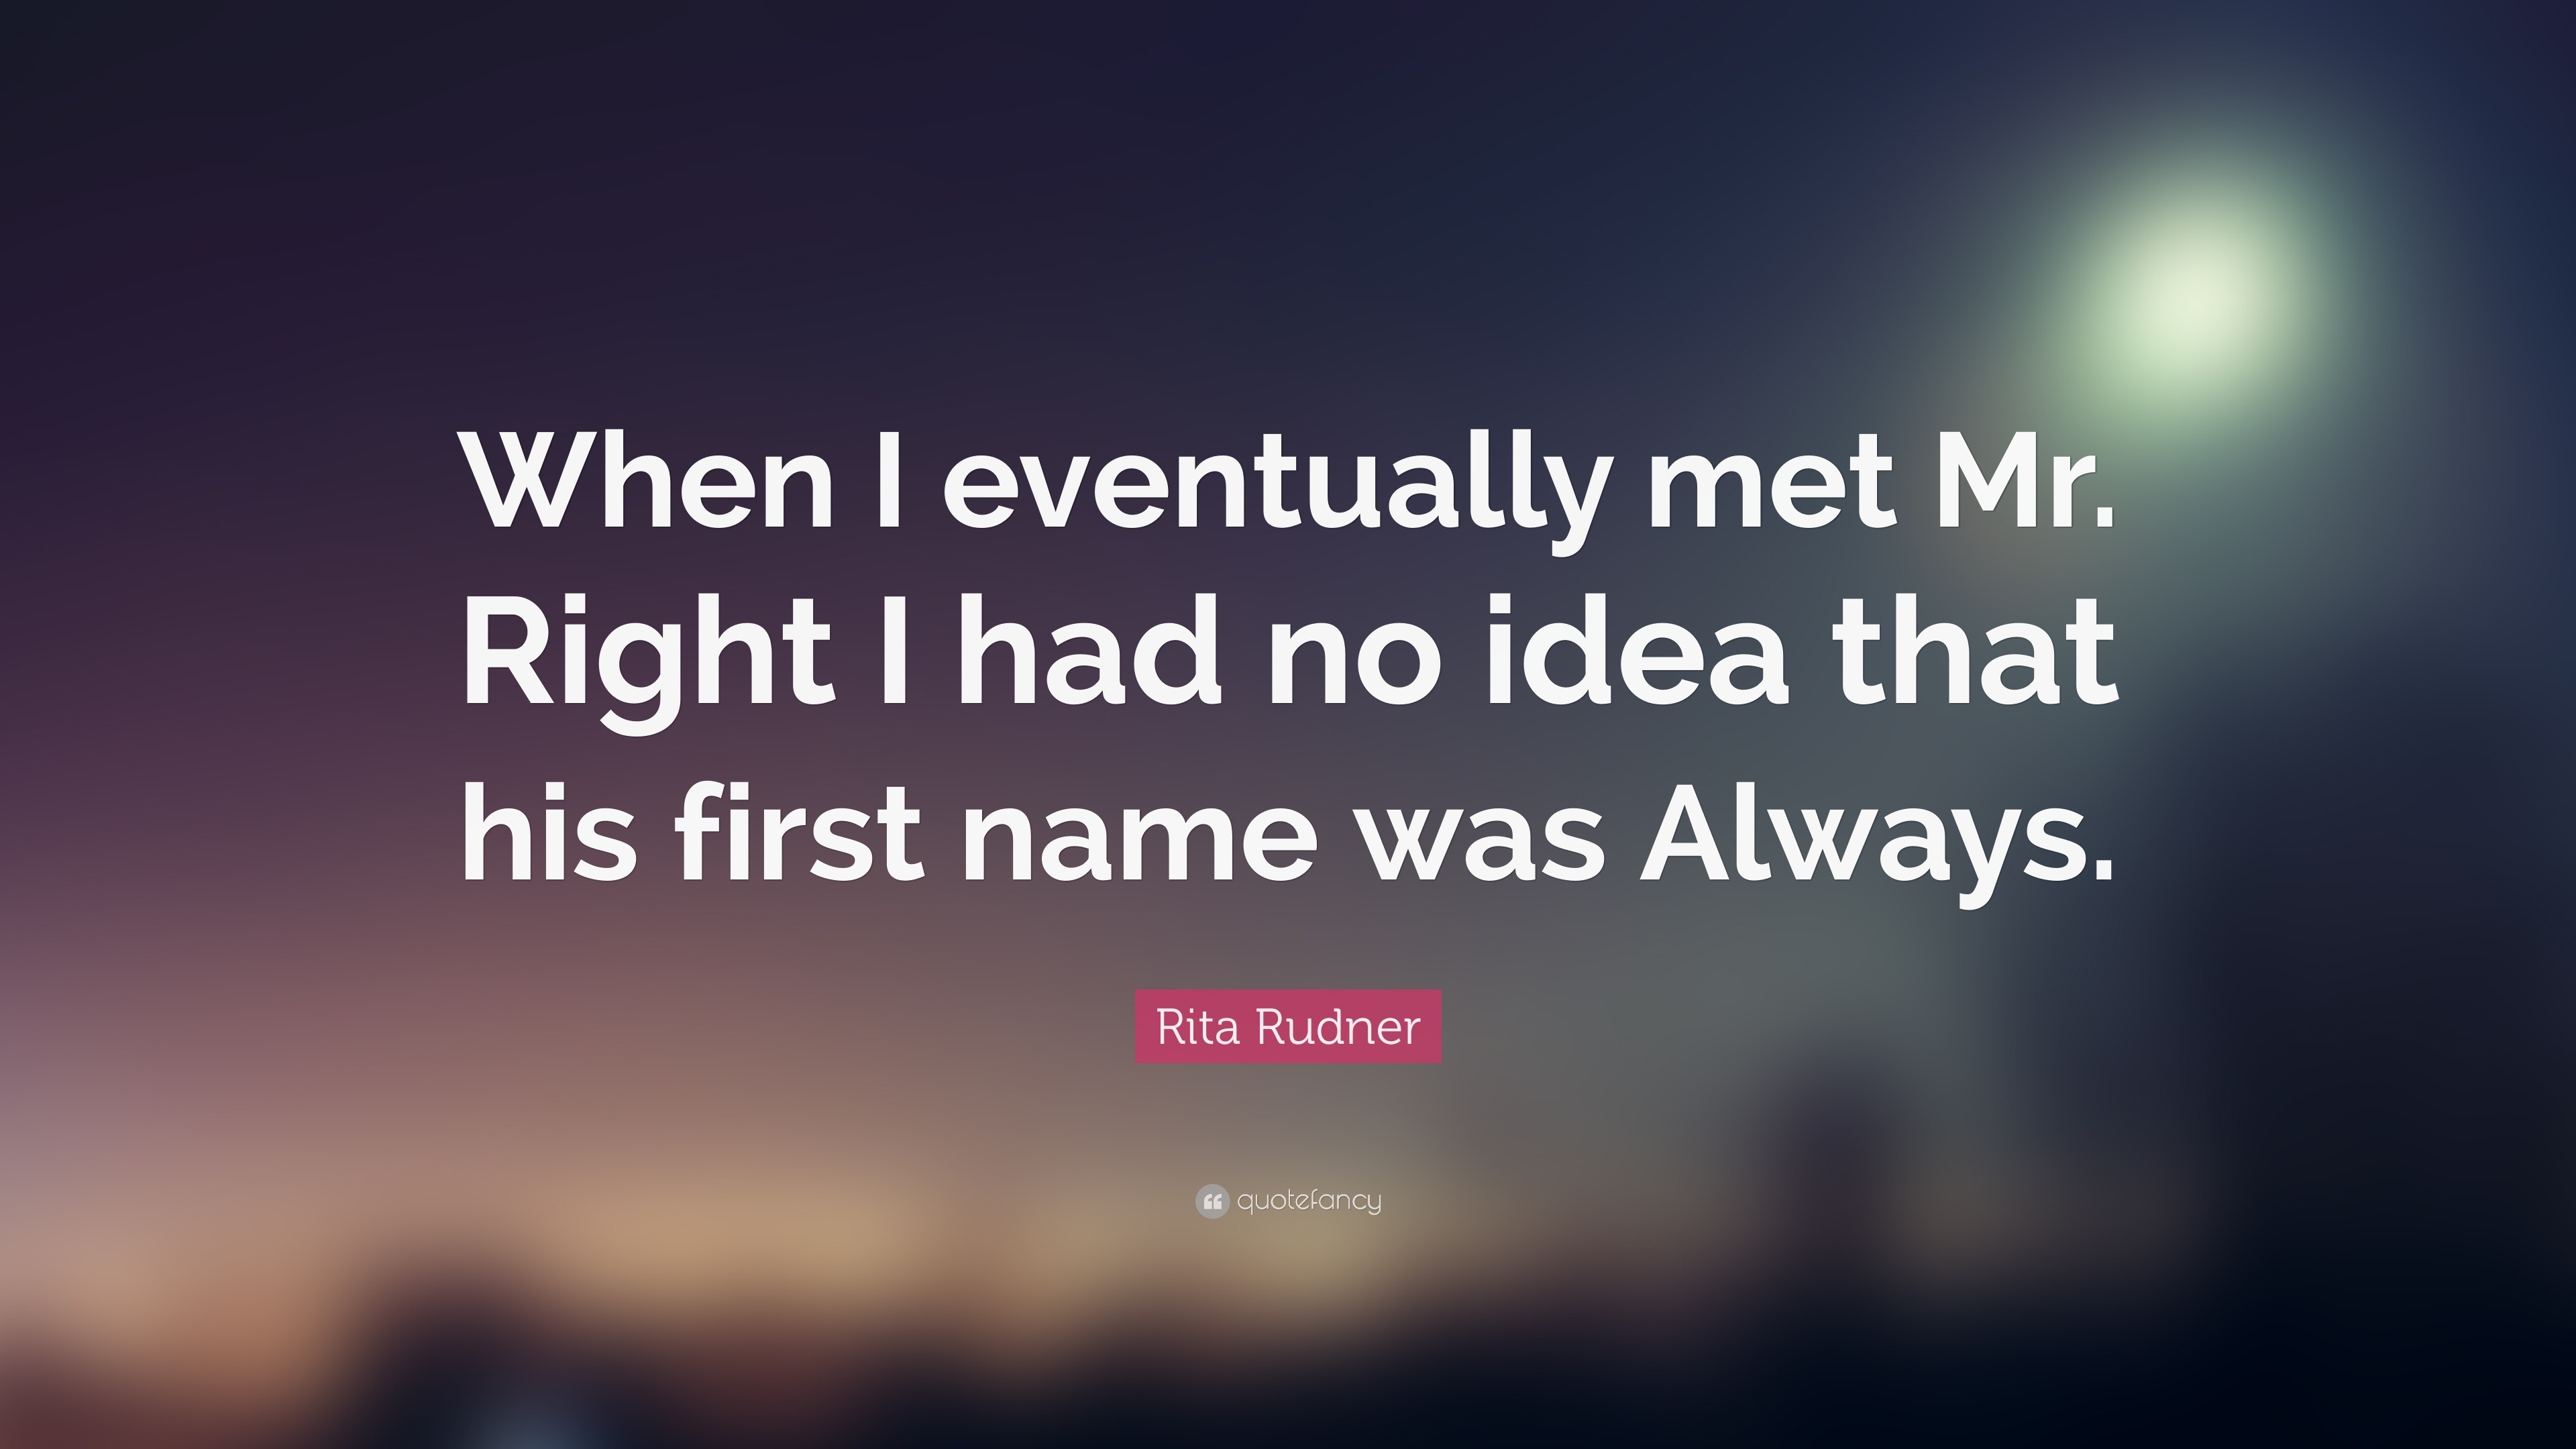 When I eventually met Mr. Right I had no idea that his first name was Alway...